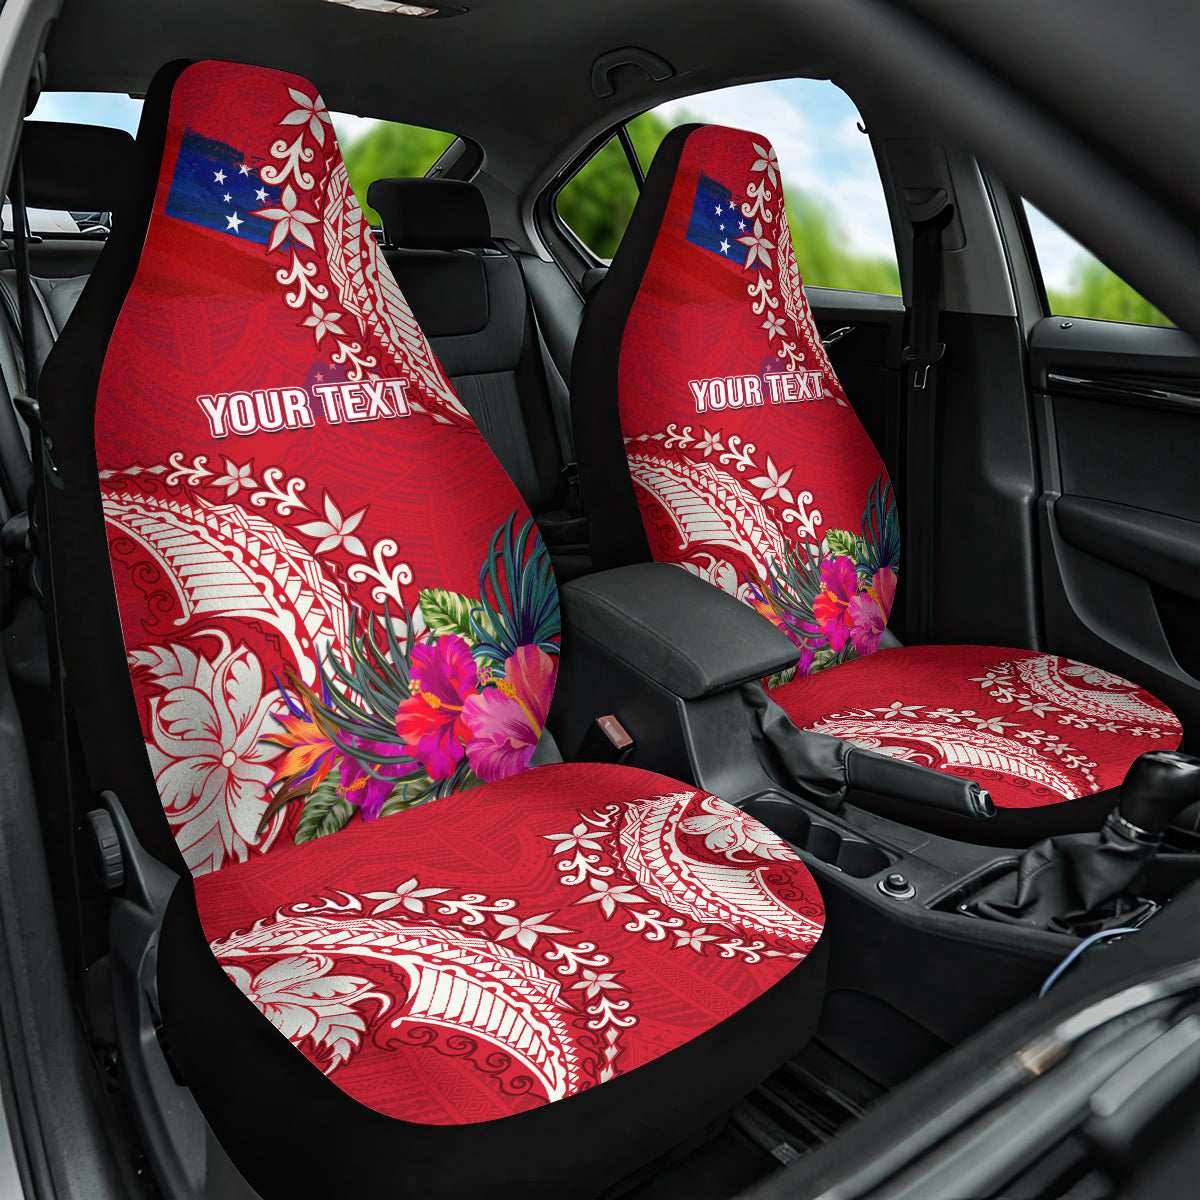 Personalised Samoa Coat Of Arms Car Seat Cover Tropical Flower Red Polynesian Pattern LT03 One Size Red - Polynesian Pride